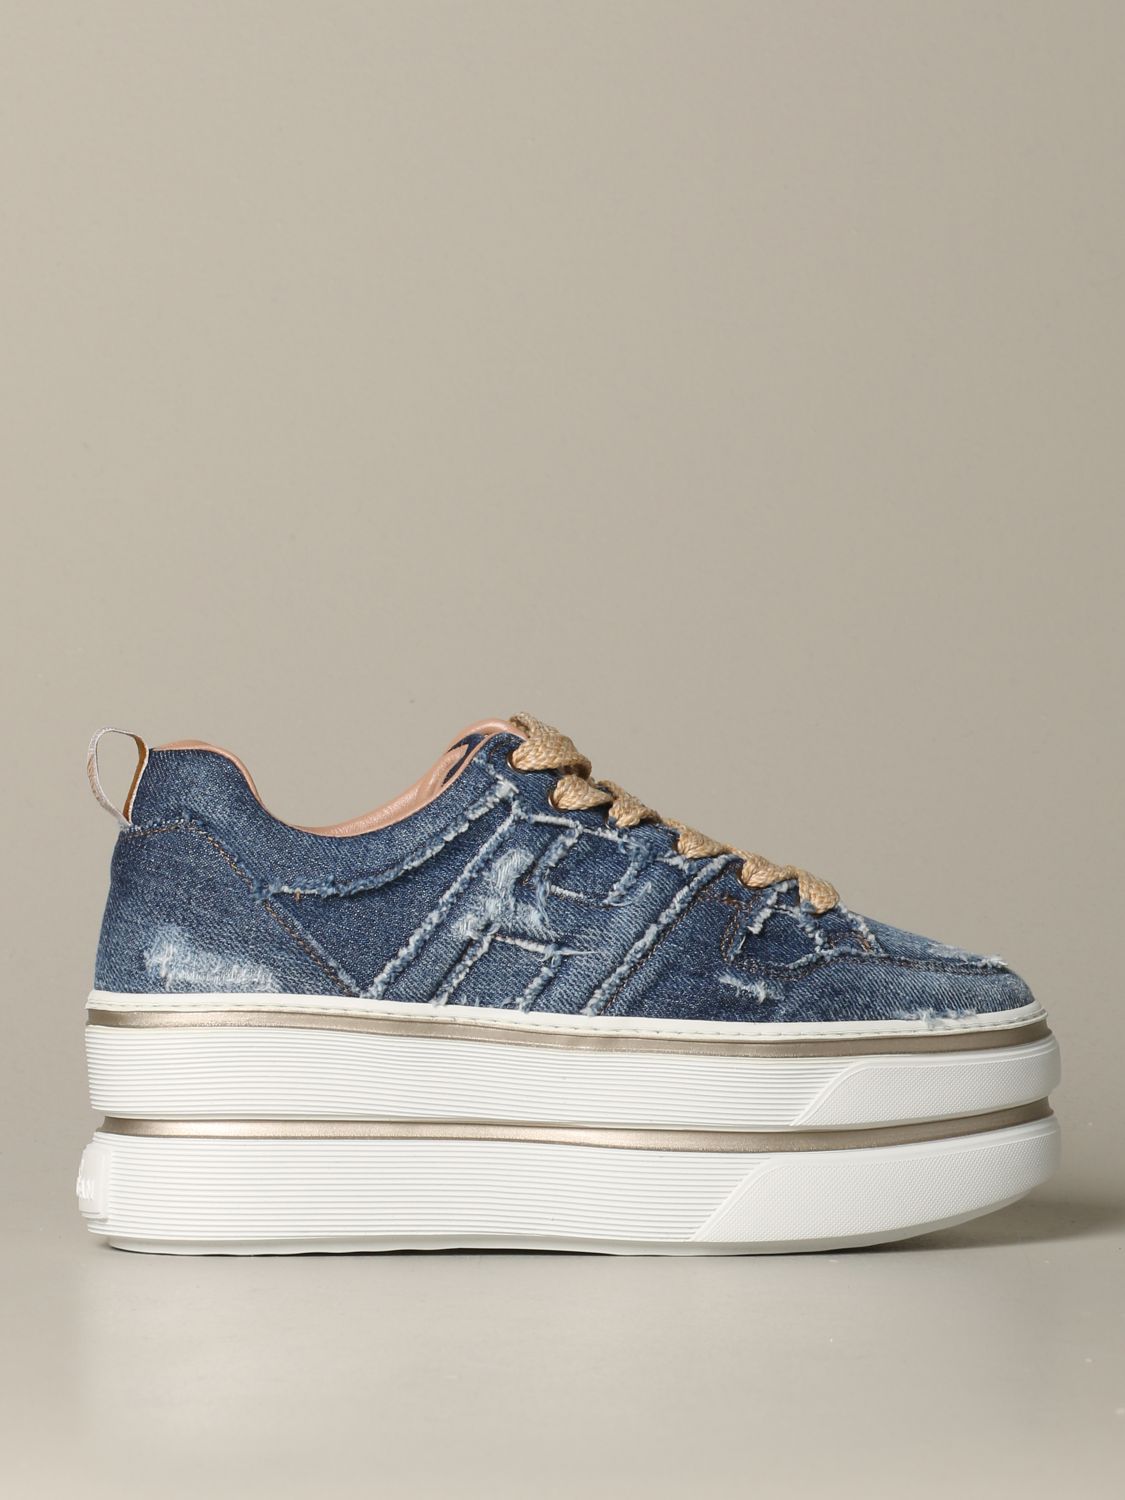 Hogan Outlet: sneakers in denim with big H - Blue | Hogan sneakers HXW4490CK90 JDL online GIGLIO.COM